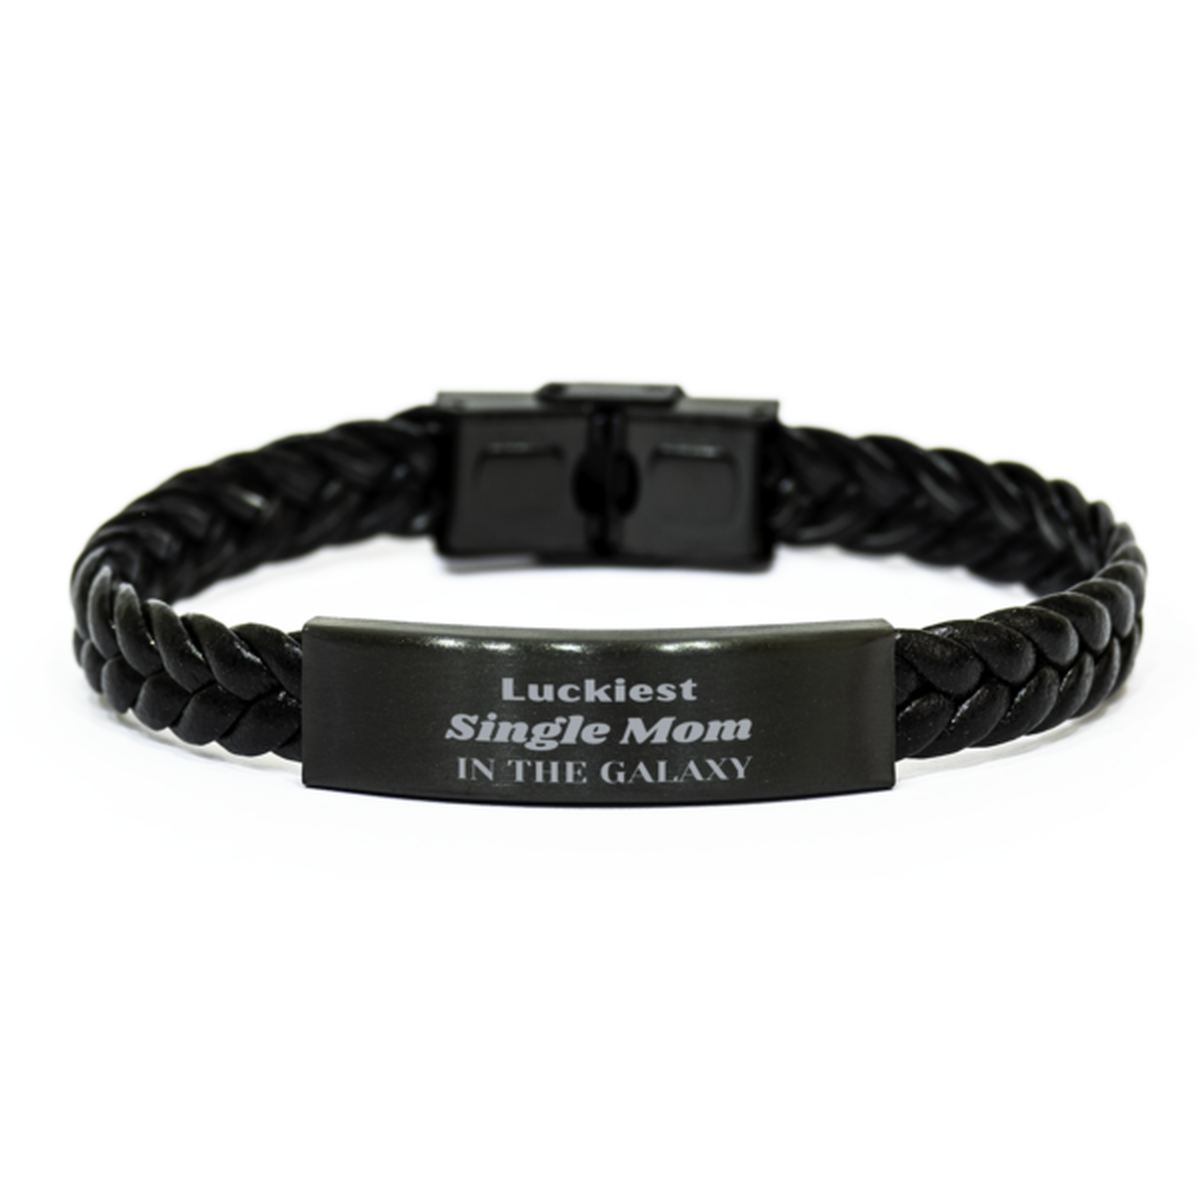 Luckiest Single Mom in the Galaxy, To My Single Mom Engraved Gifts, Christmas Single Mom Braided Leather Bracelet Gifts, X-mas Birthday Unique Gifts For Single Mom Men Women